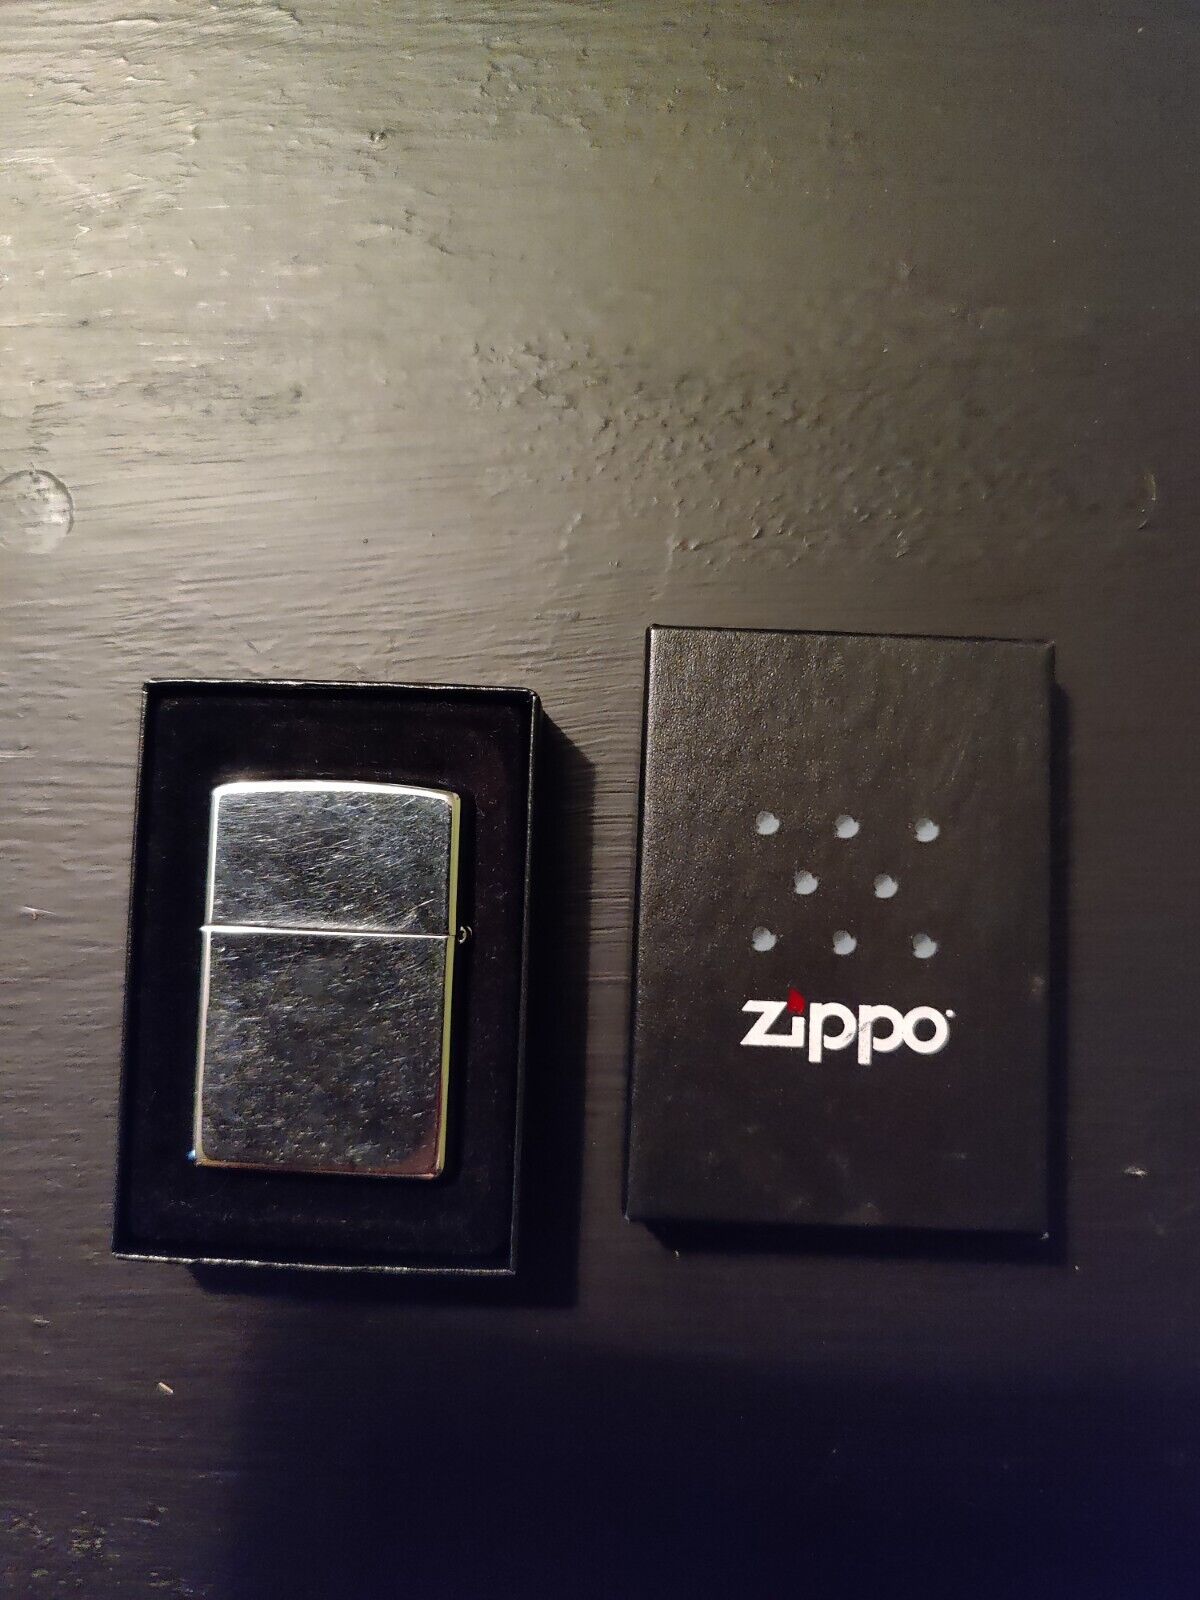 Zippo Classic Pocket Lighter - Brushed Chrome New in box